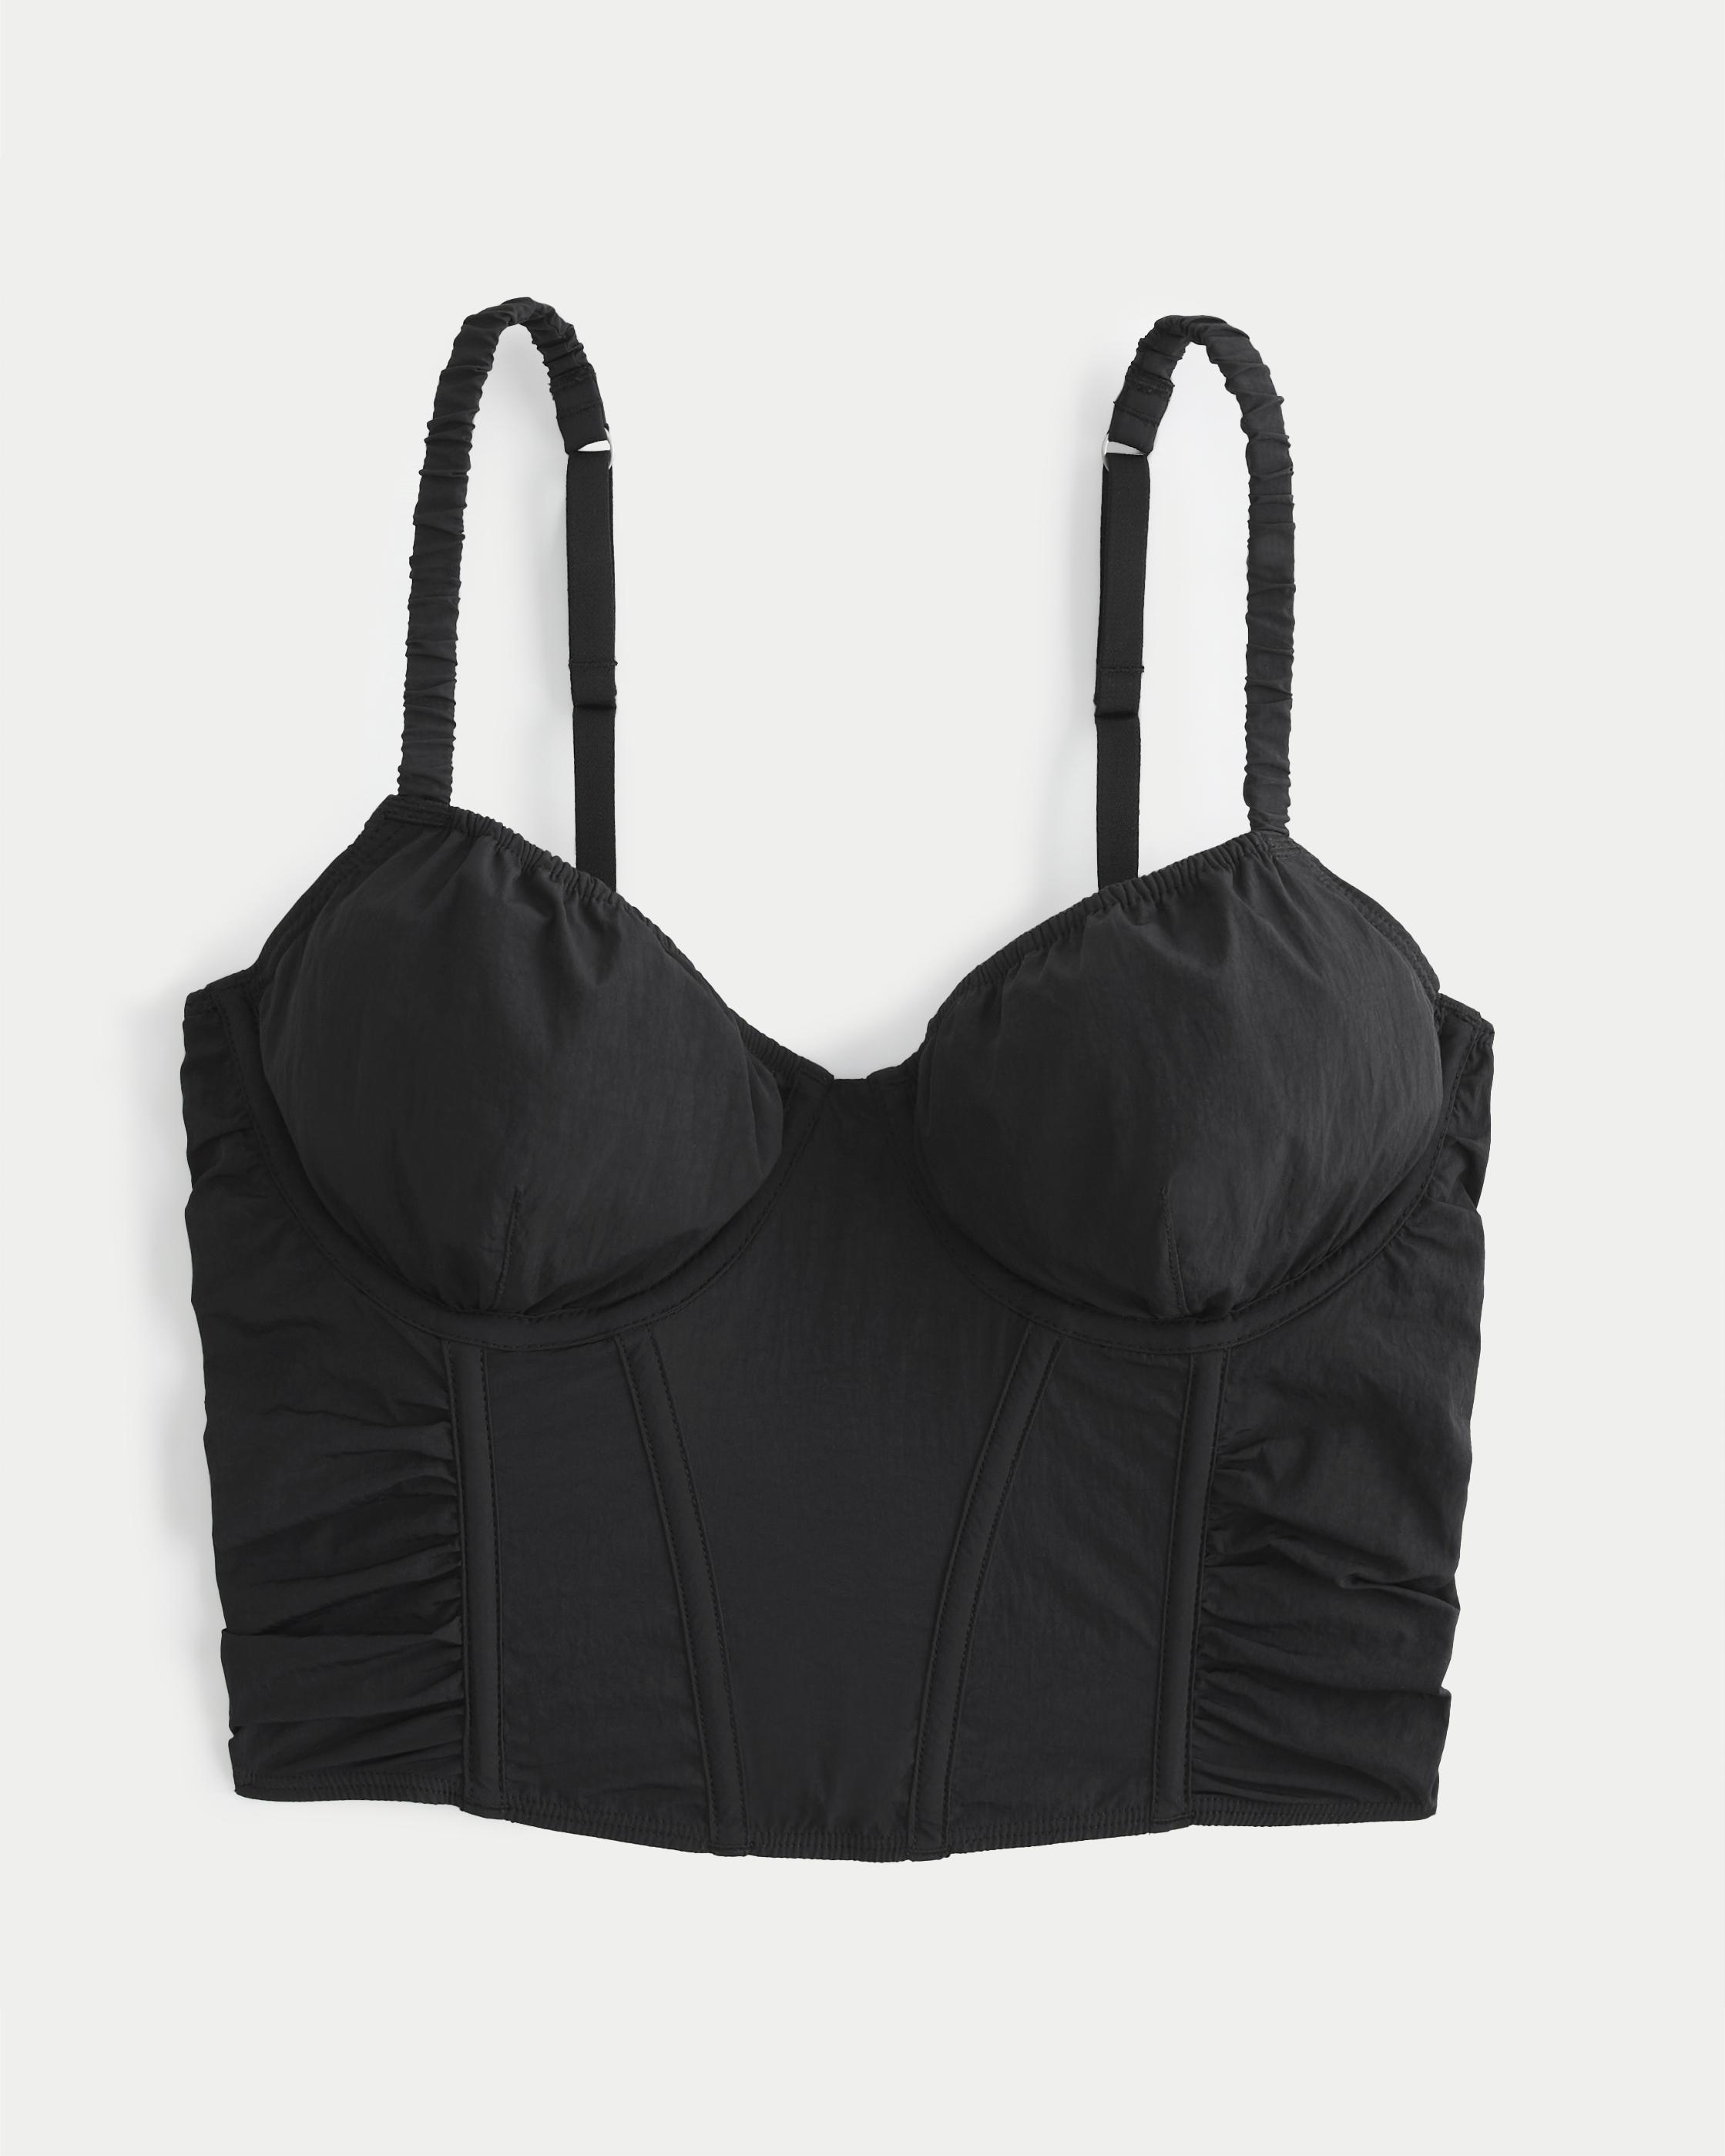 Hollister Gilly Hicks Bustier